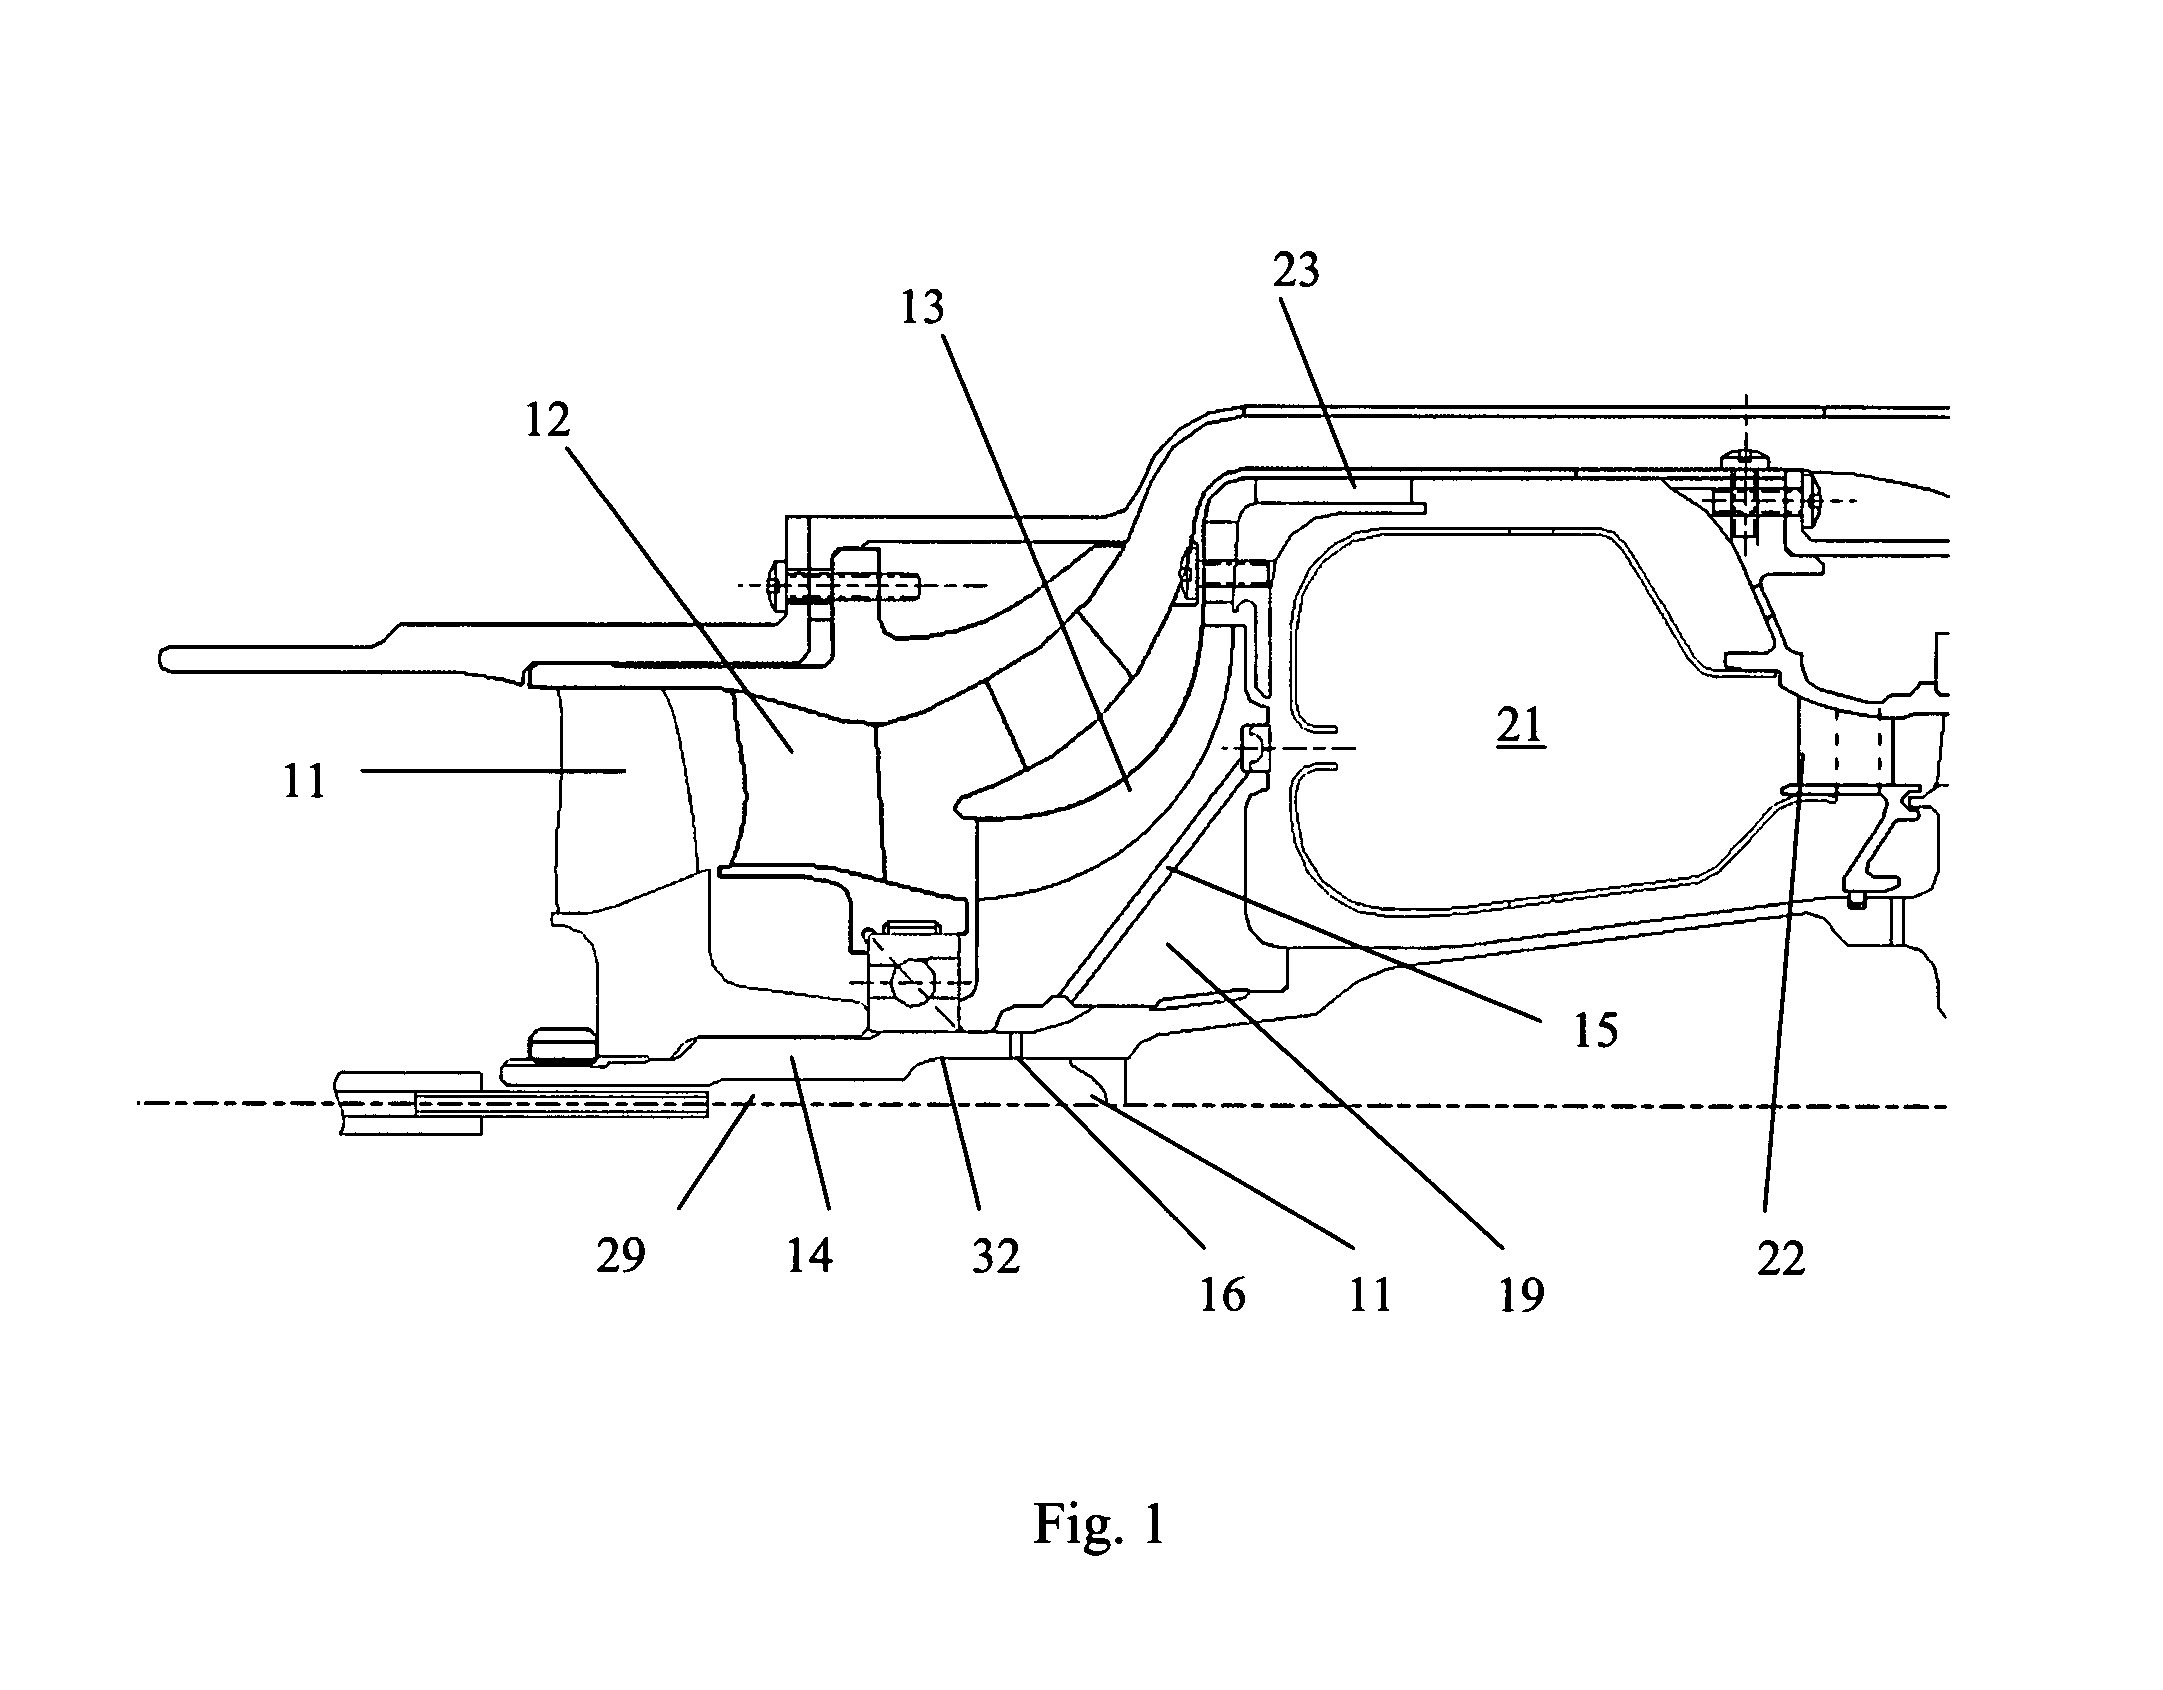 Integral gas turbine compressor and rotary fuel injector